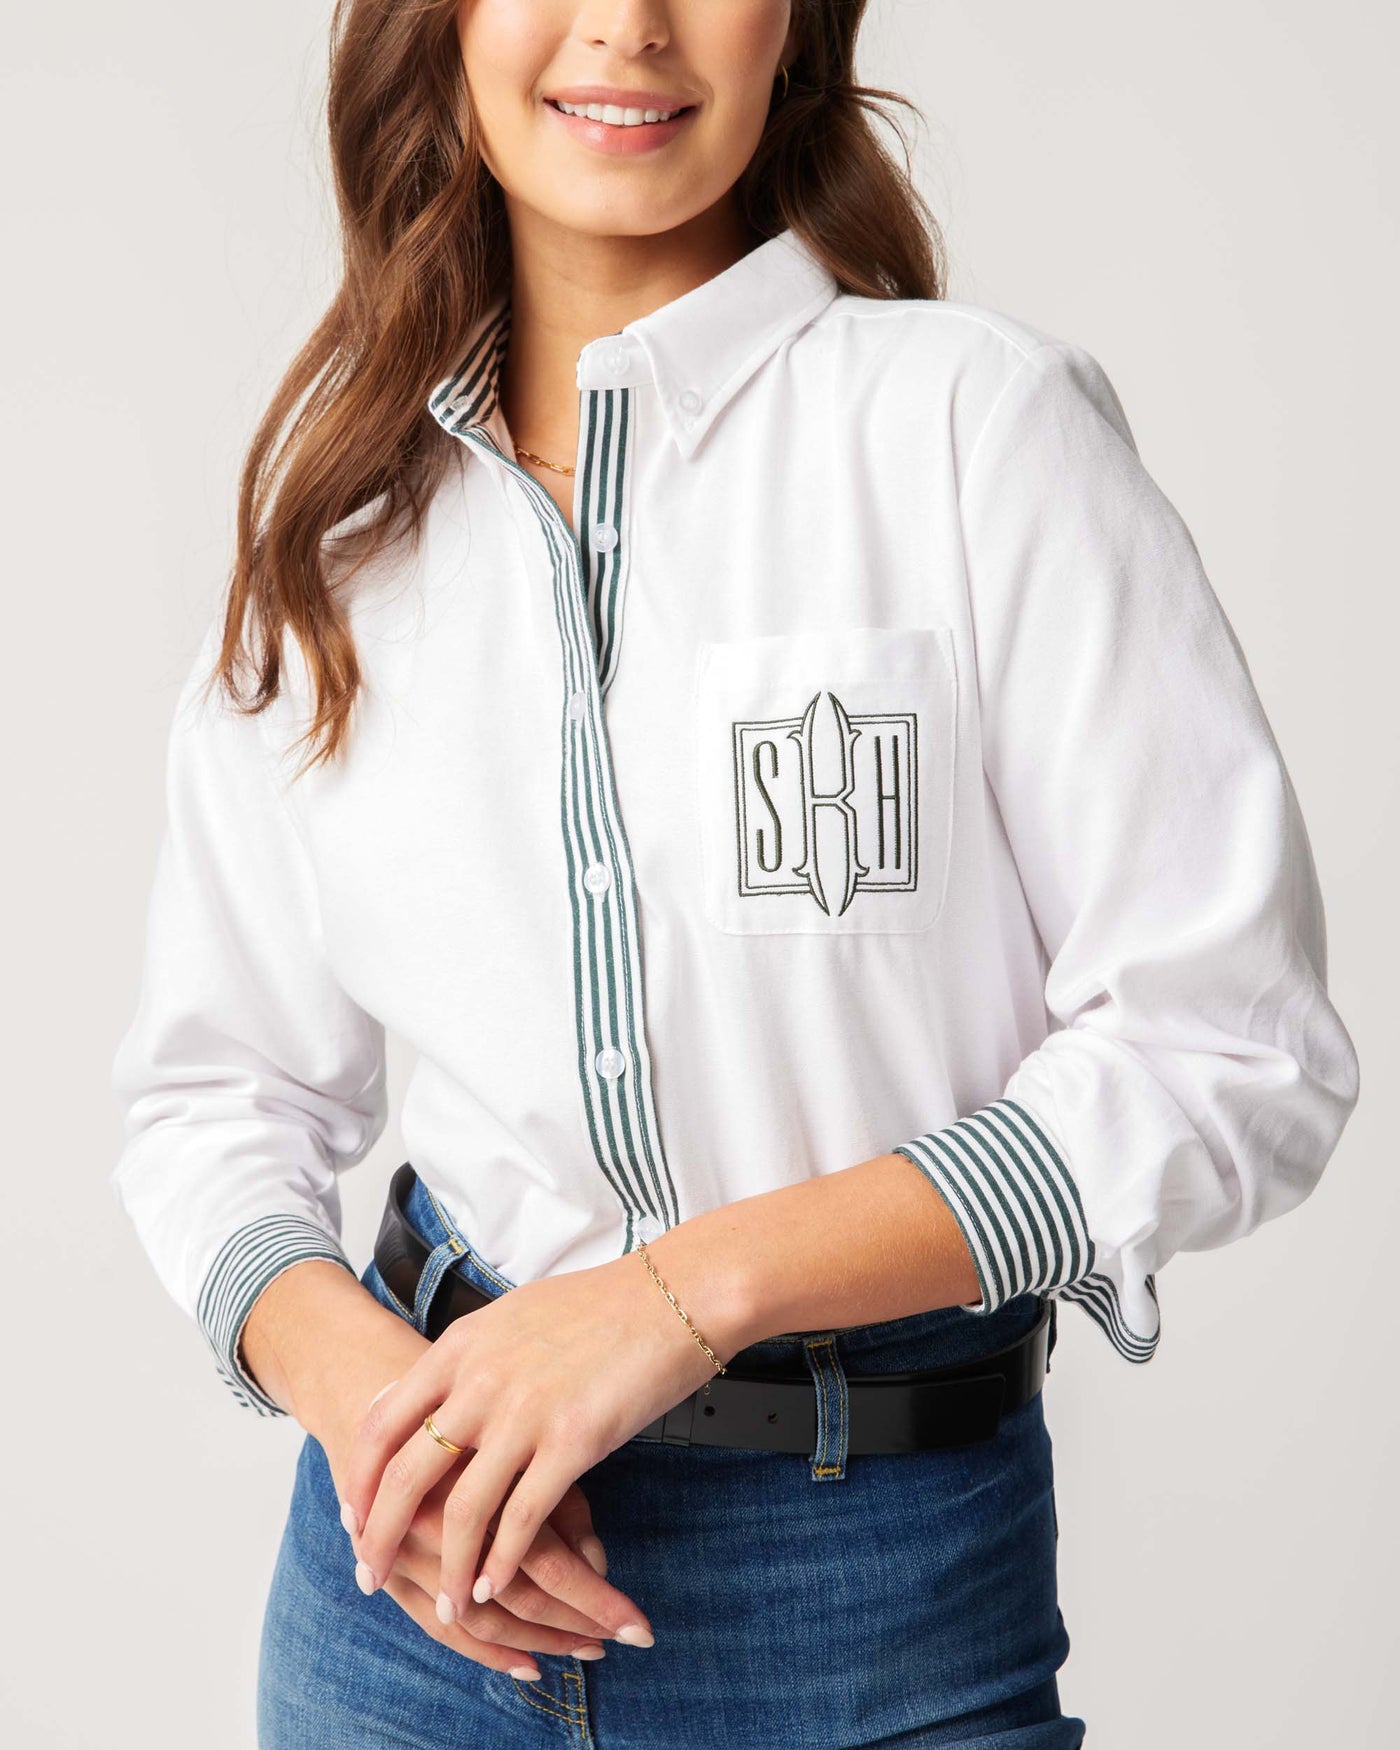 The Chelsea Button Down Top Katie Kime